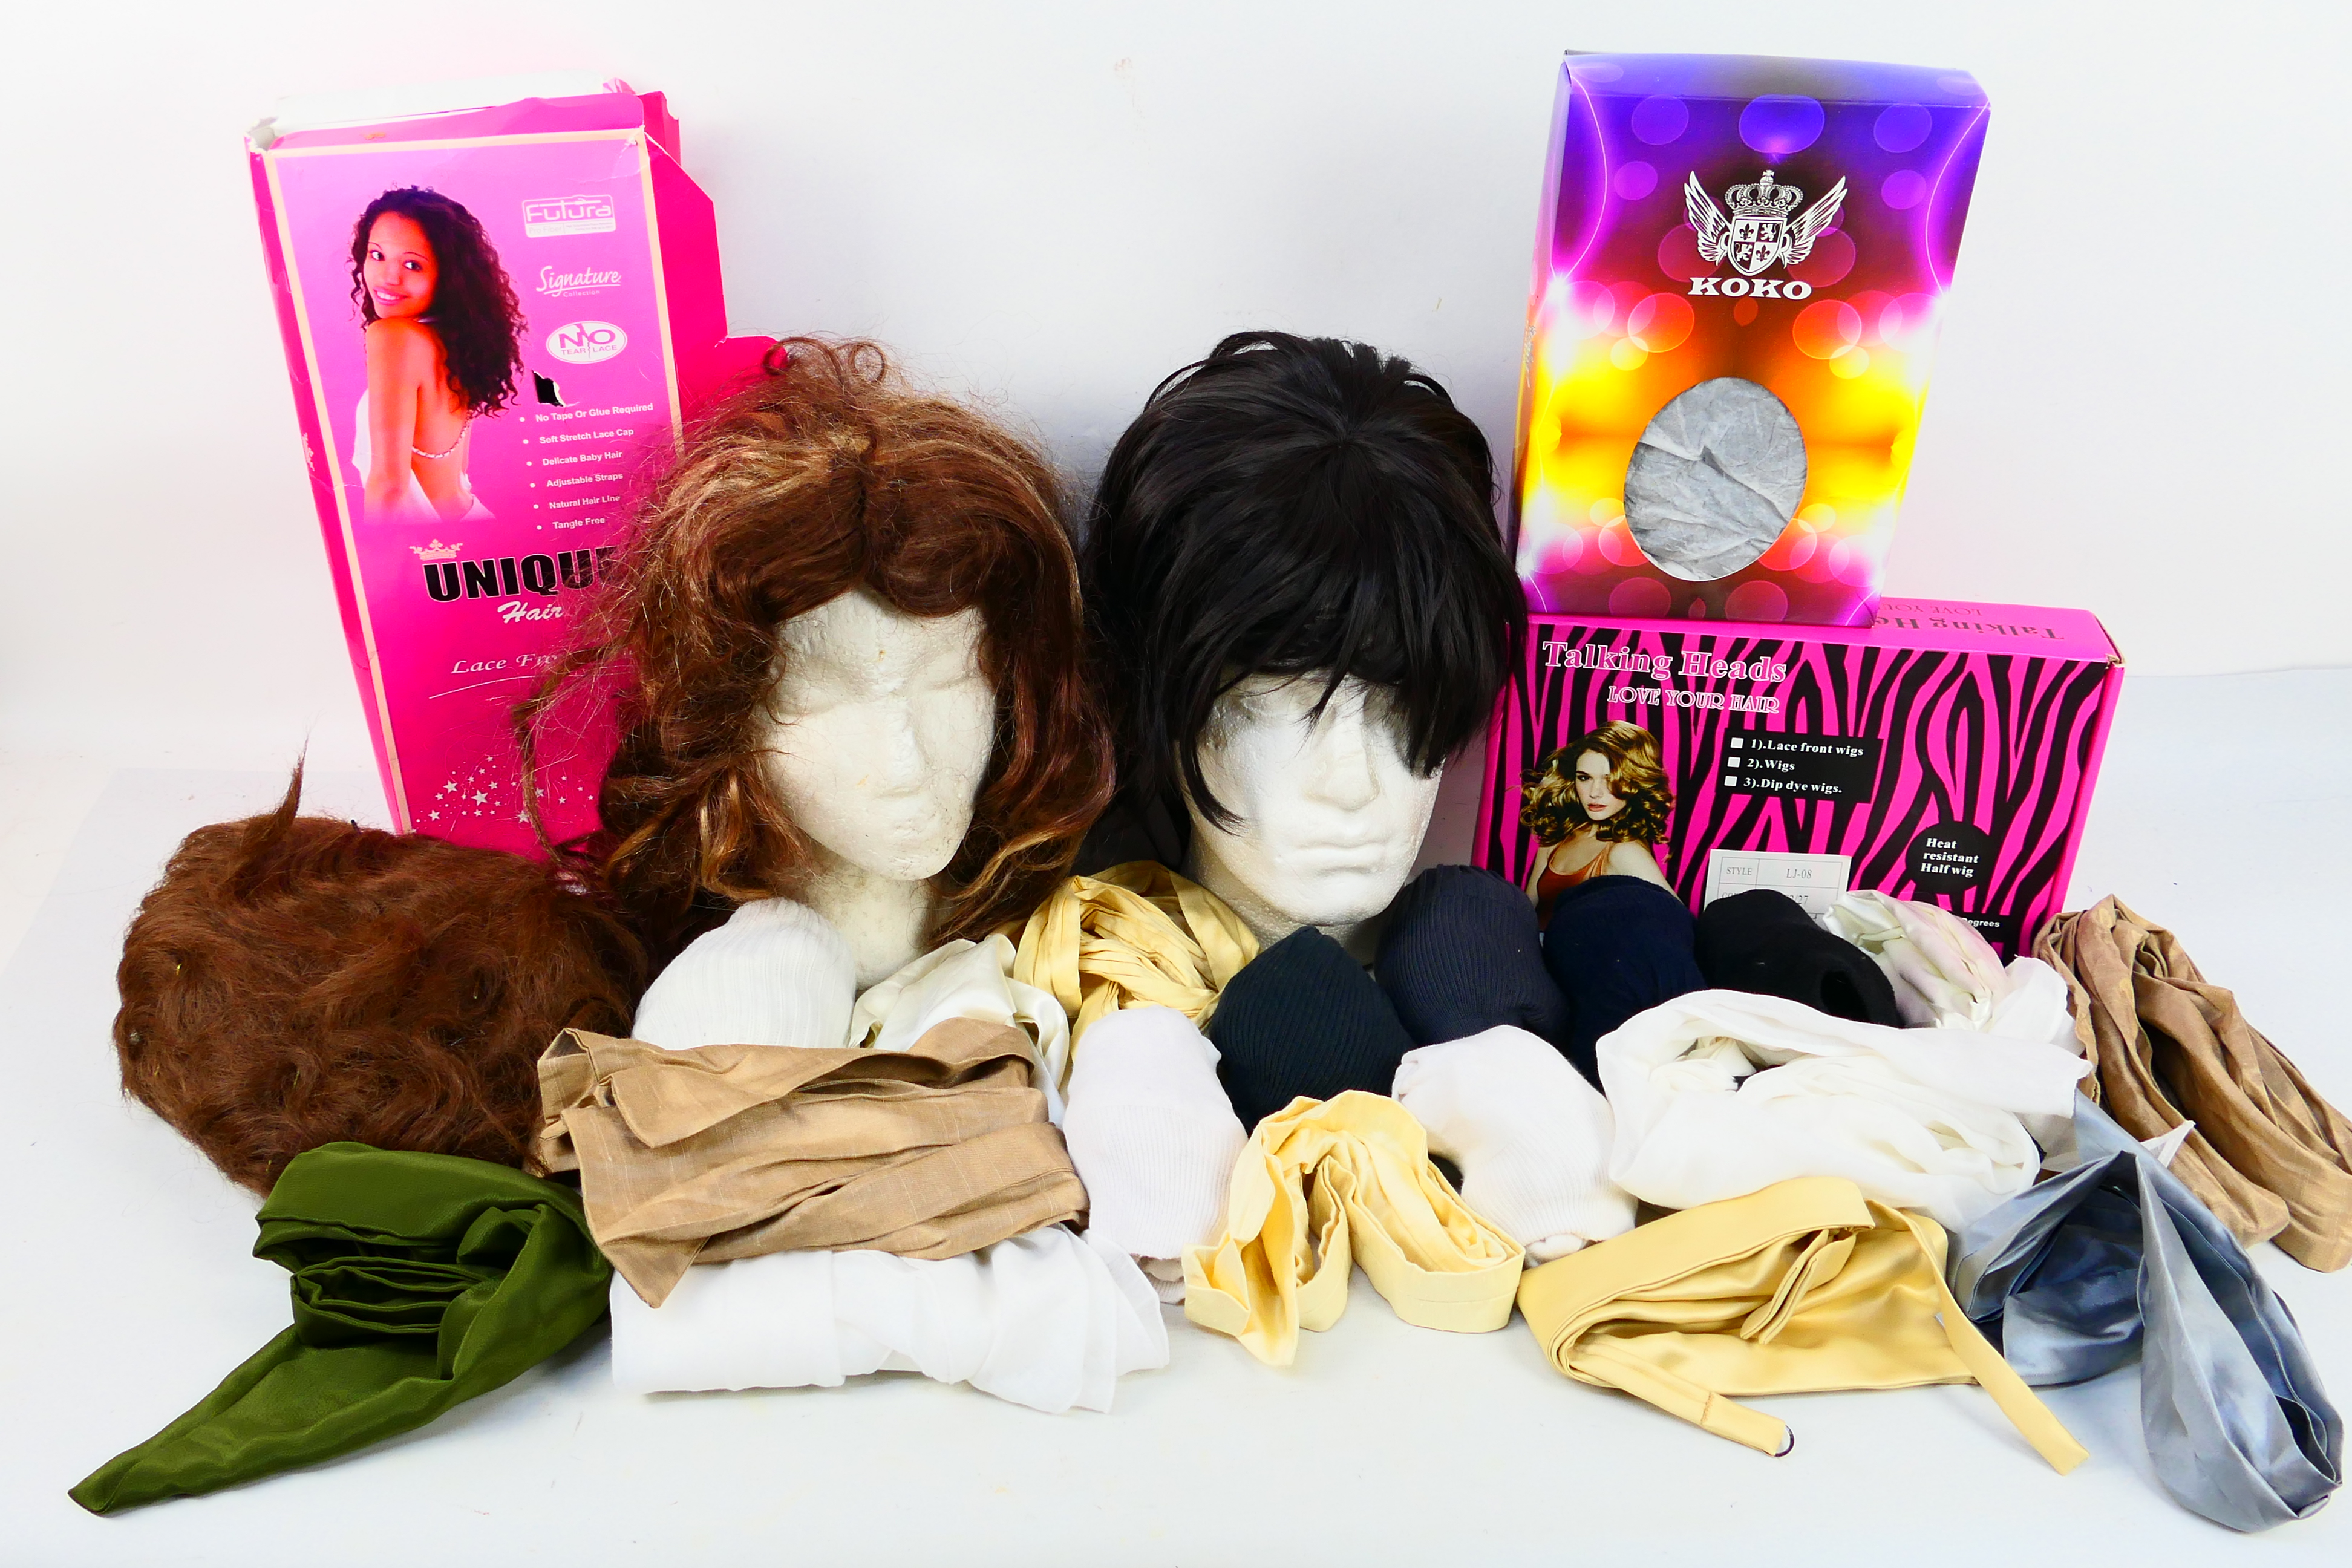 Wigs - A selection of Costume / Theatre wigs appearing in Good to Excellent condition.